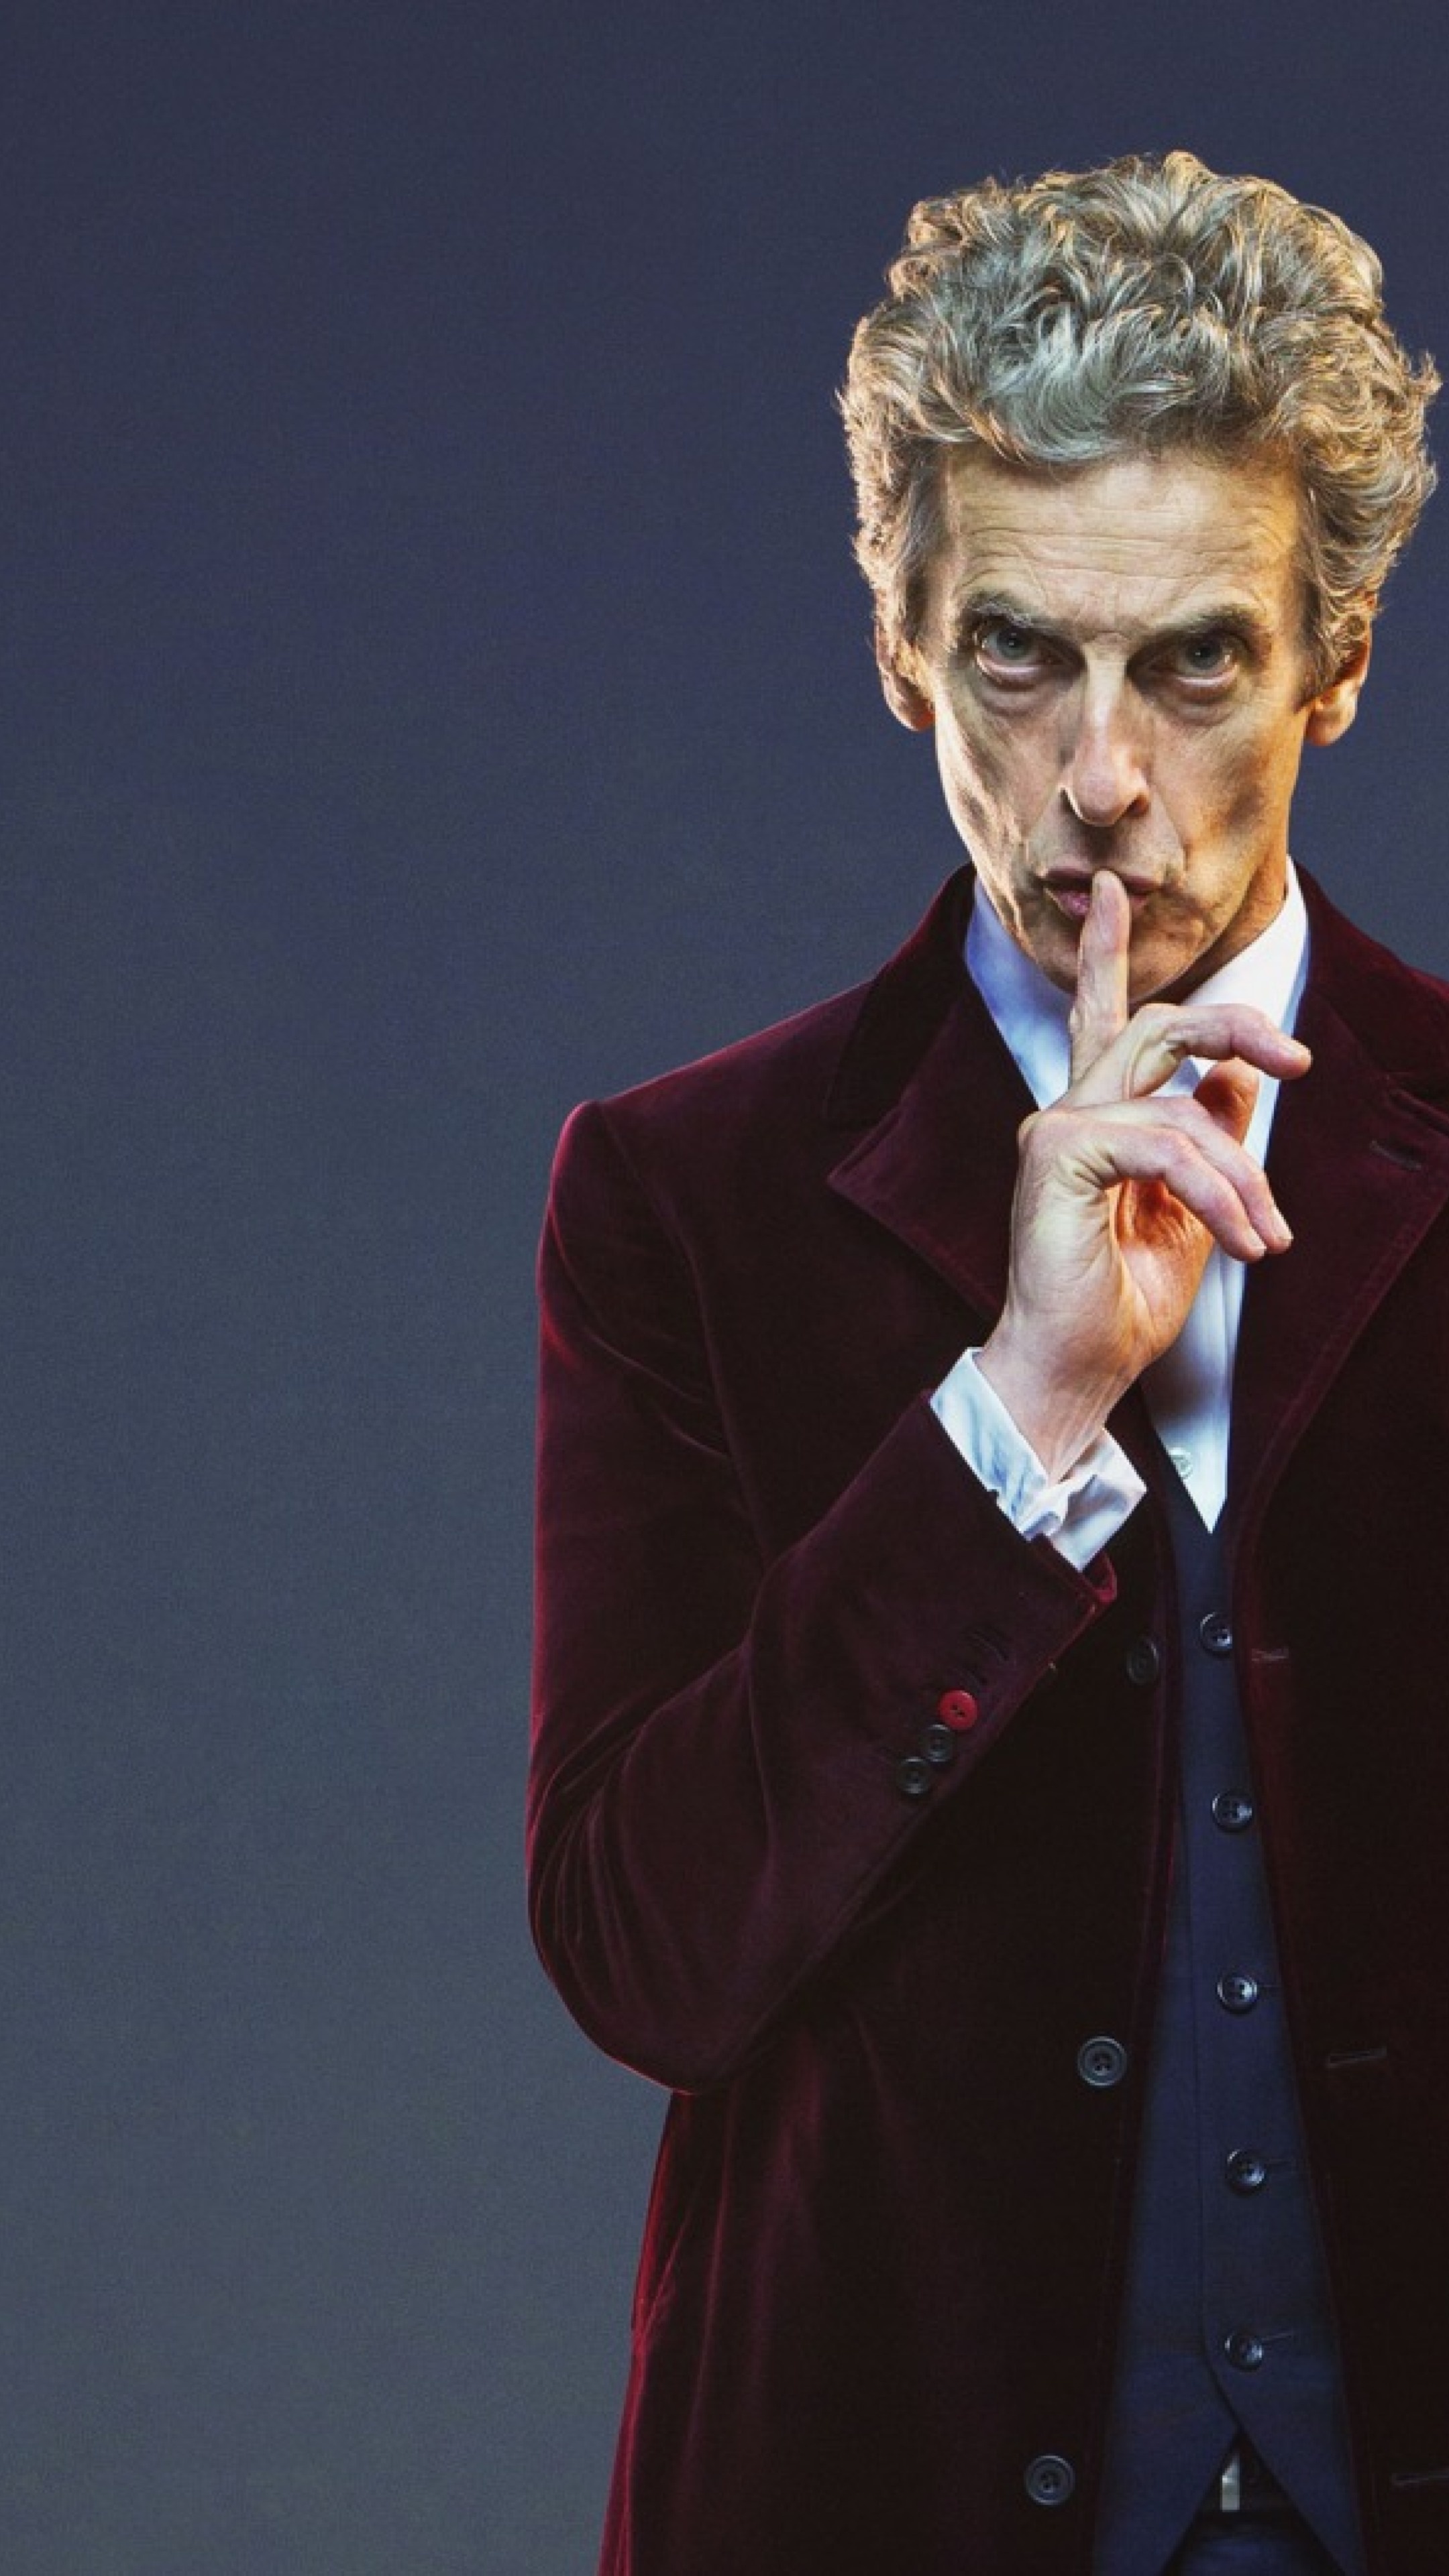 Doctor Who, Twelfth Doctor, Xperia X, Wallpaper, 2160x3840 4K Phone